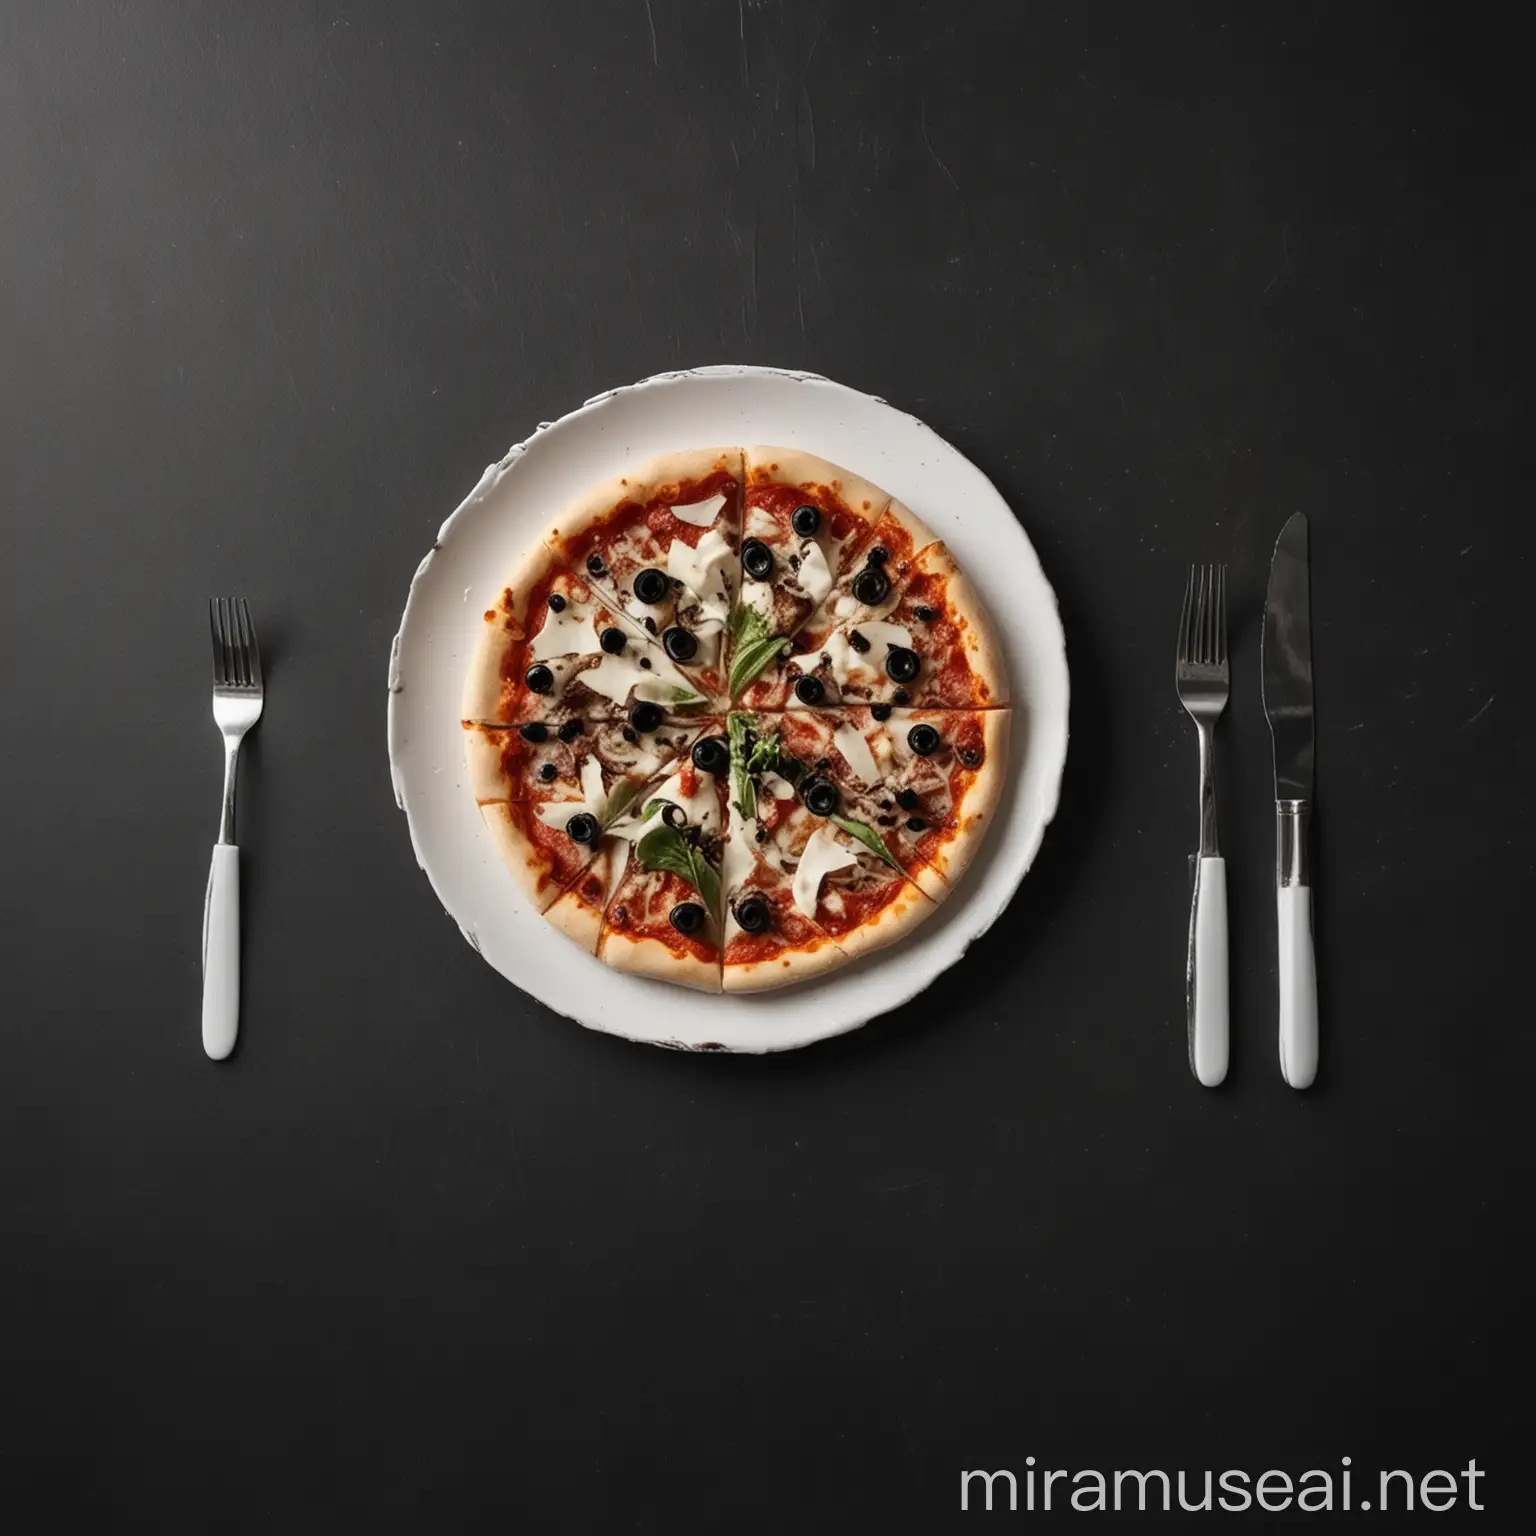 Overhead View of Pizza Hawaii on White Plate with Cutlery